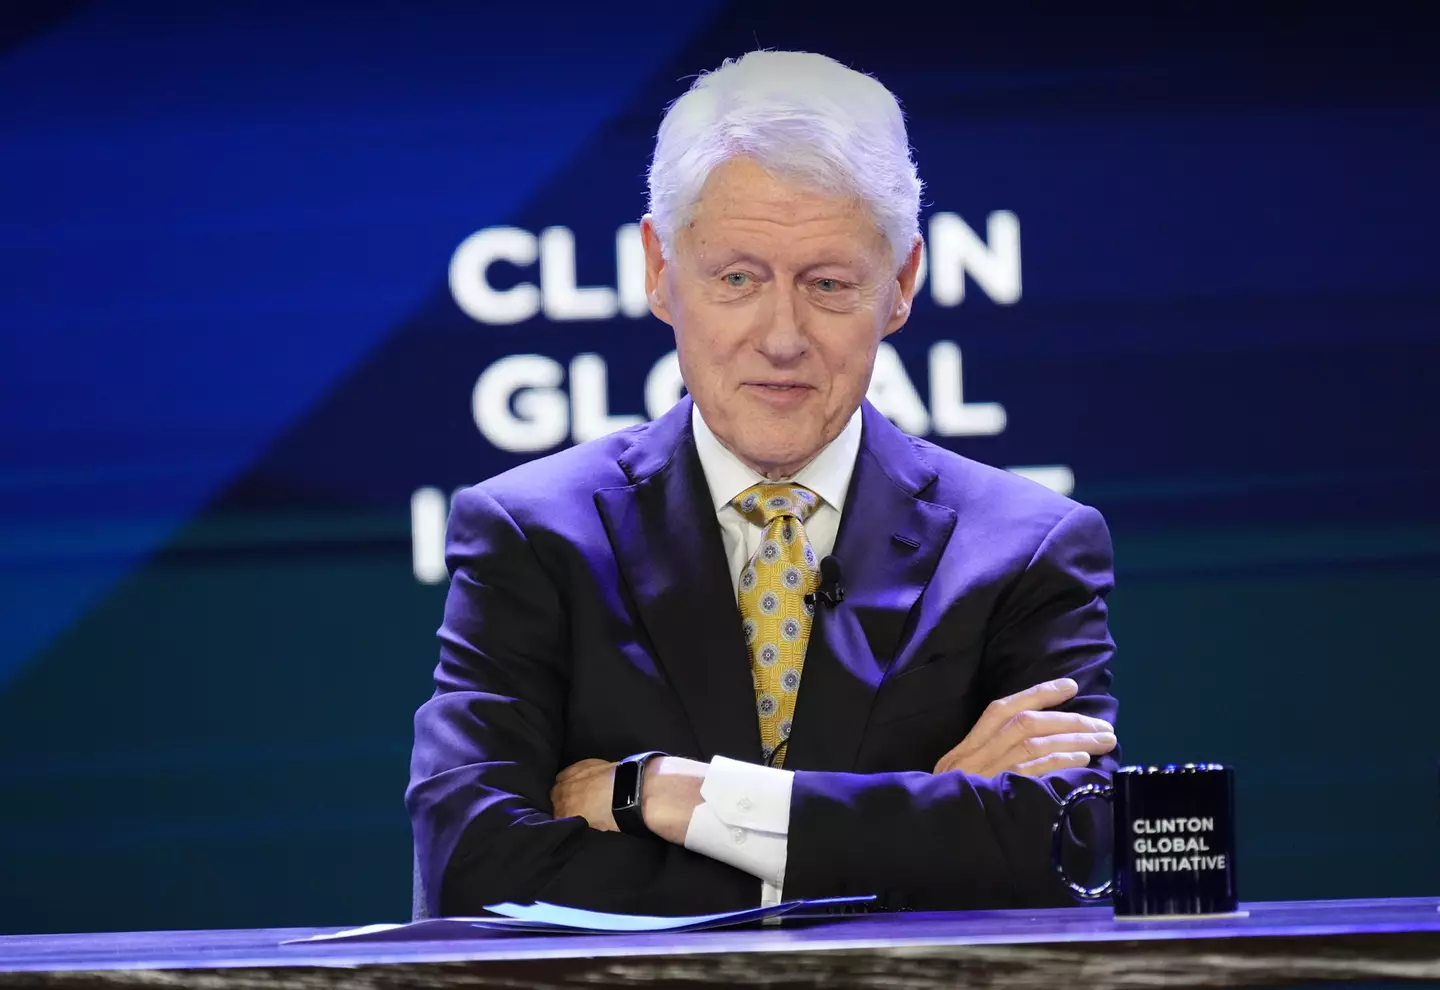 Jeffery Epstein took sex tapes of Bill Clinton, according to court documents.